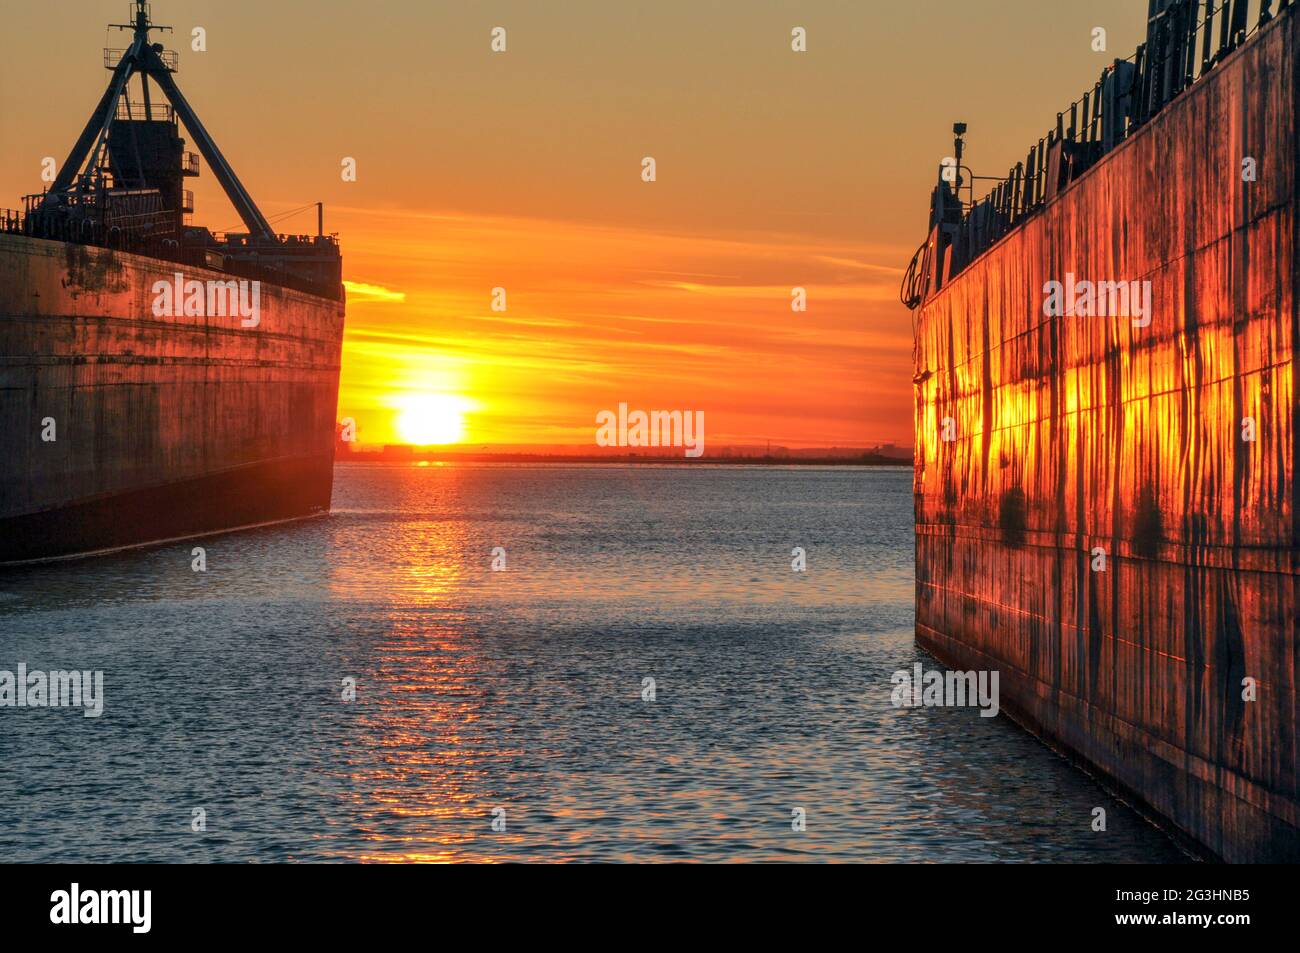 Two bulk carrier laker ships are seen in the port of Toronto, glowing a fiery orange at sunset. Concept of maritime shipping. Stock Photo